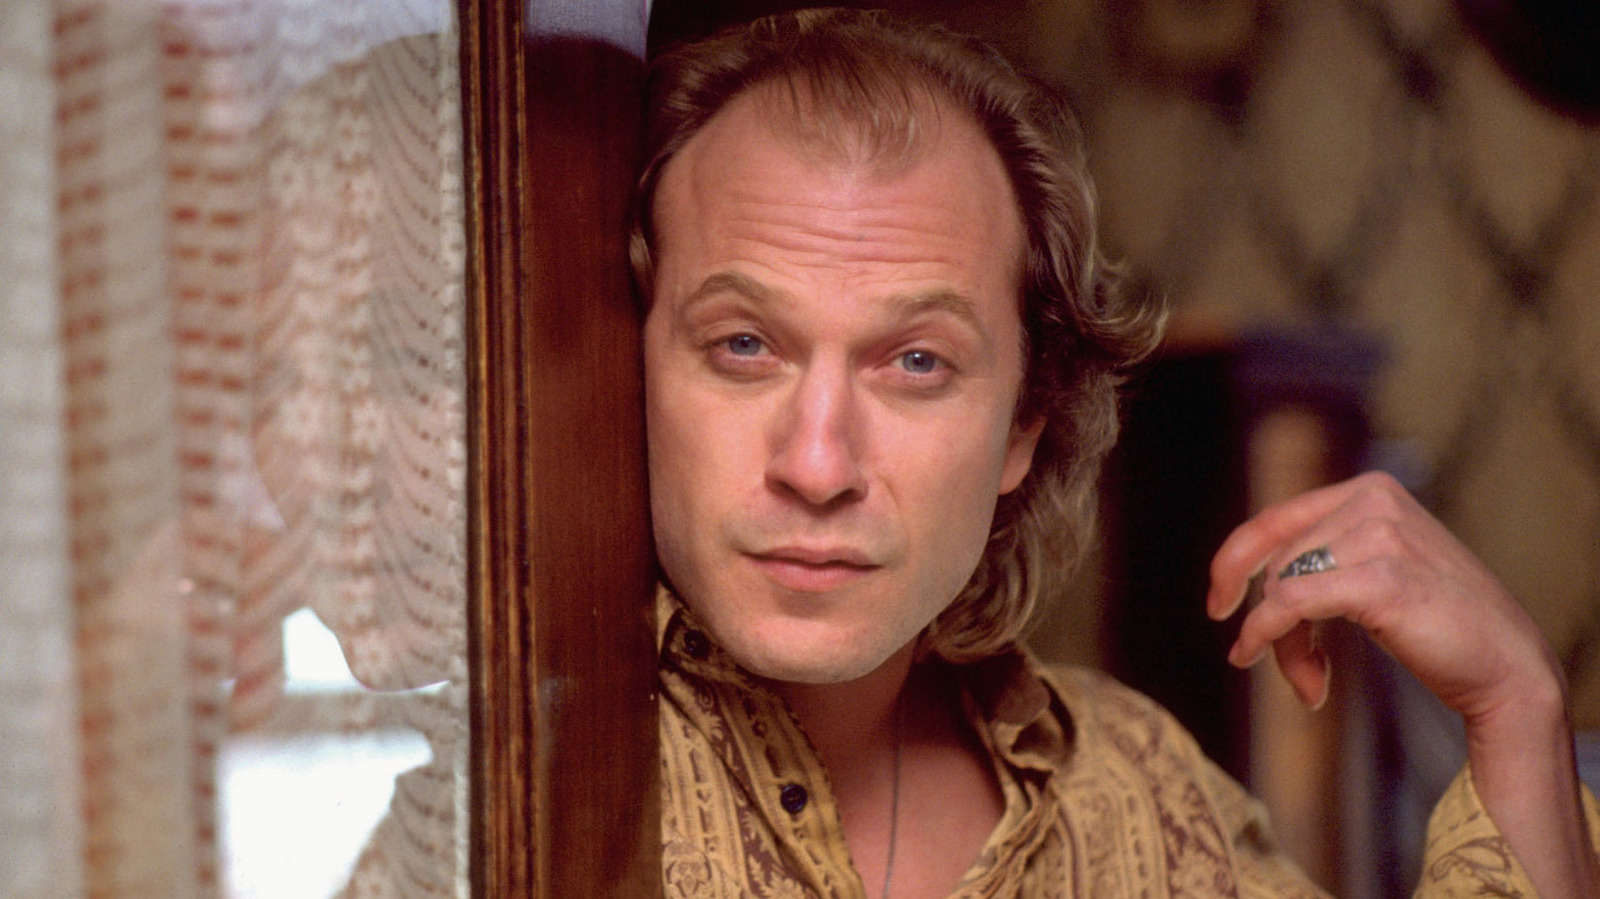 <p>"Goodbye Horses" in <em>The Silence of the Lambs</em> is that audacious needle drop that makes you question your own sanity while admiring its brilliance. When Buffalo Bill, the creepiest villain in cinematic history, starts shimmying in front of a mirror, you'd think you've wandered into a David Lynch nightmare. But then, the haunting, ethereal notes of Q Lazzarus's song slither in, turning this grotesque scene into a surreal ballet of darkness.</p>